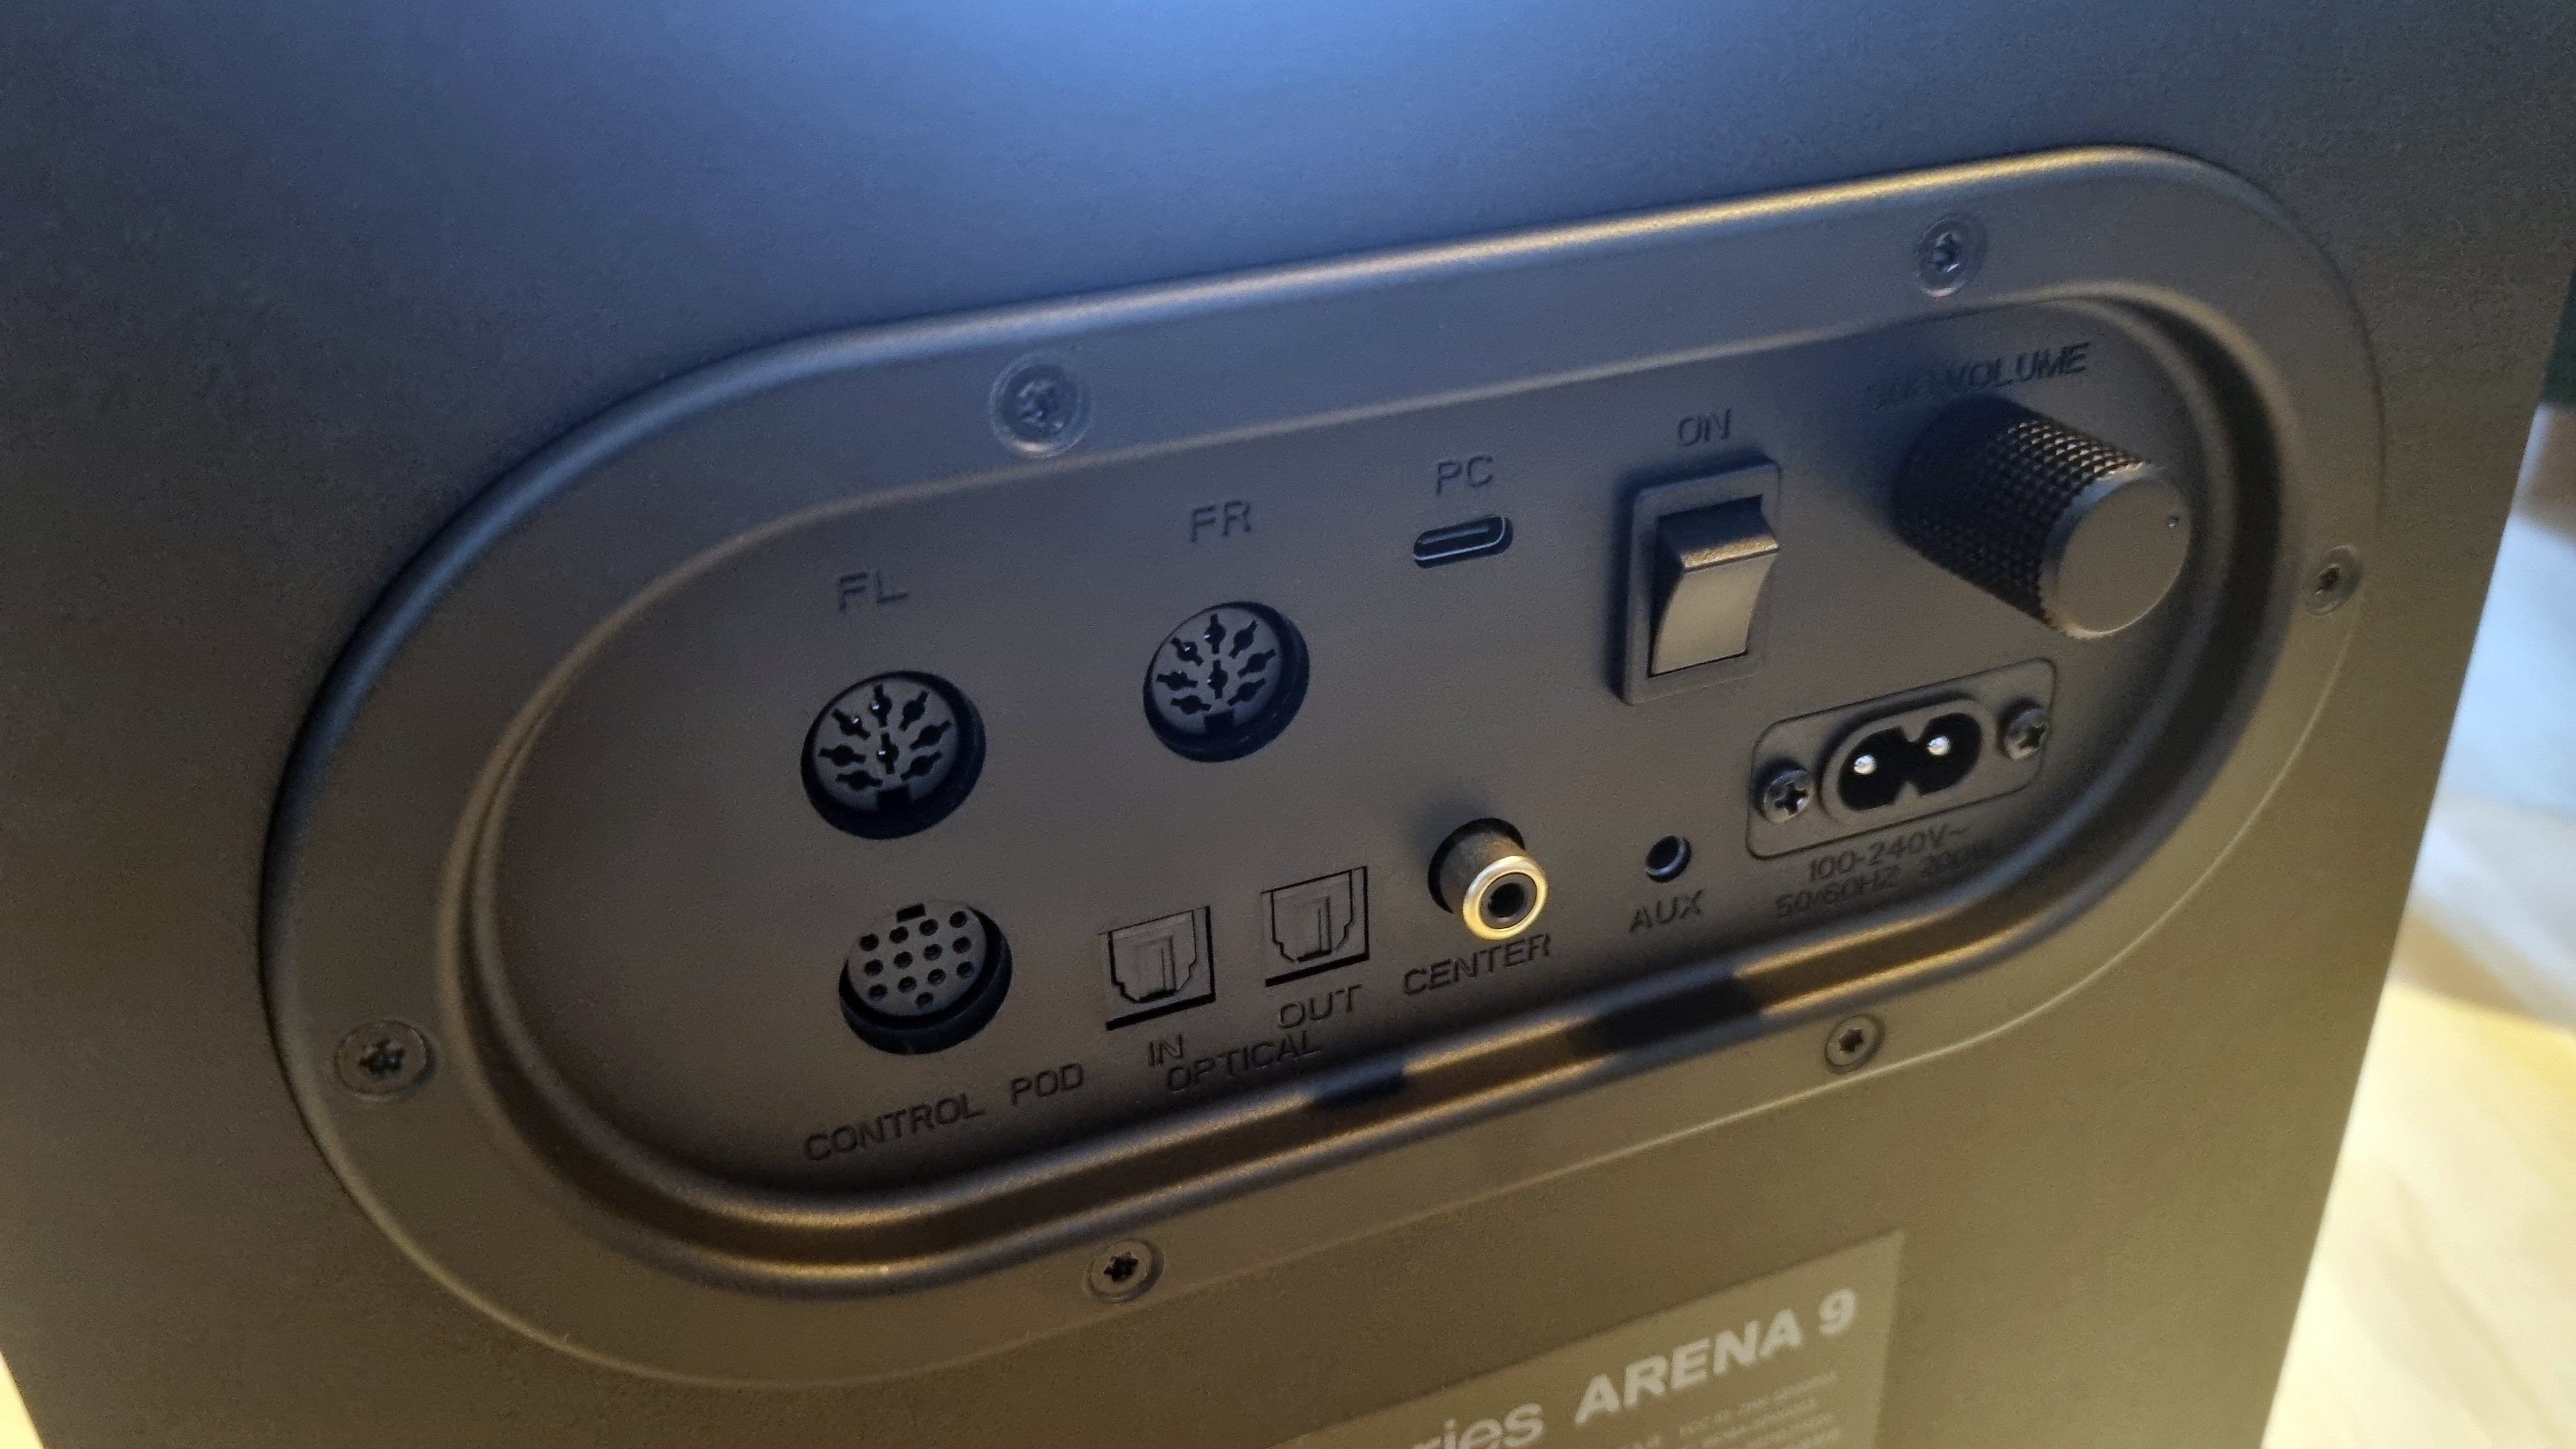 The rear connector pane of the SteelSeries Arena 9 subwoofer, showing the various inputs and outputs along with power switches and subwoofer volume control